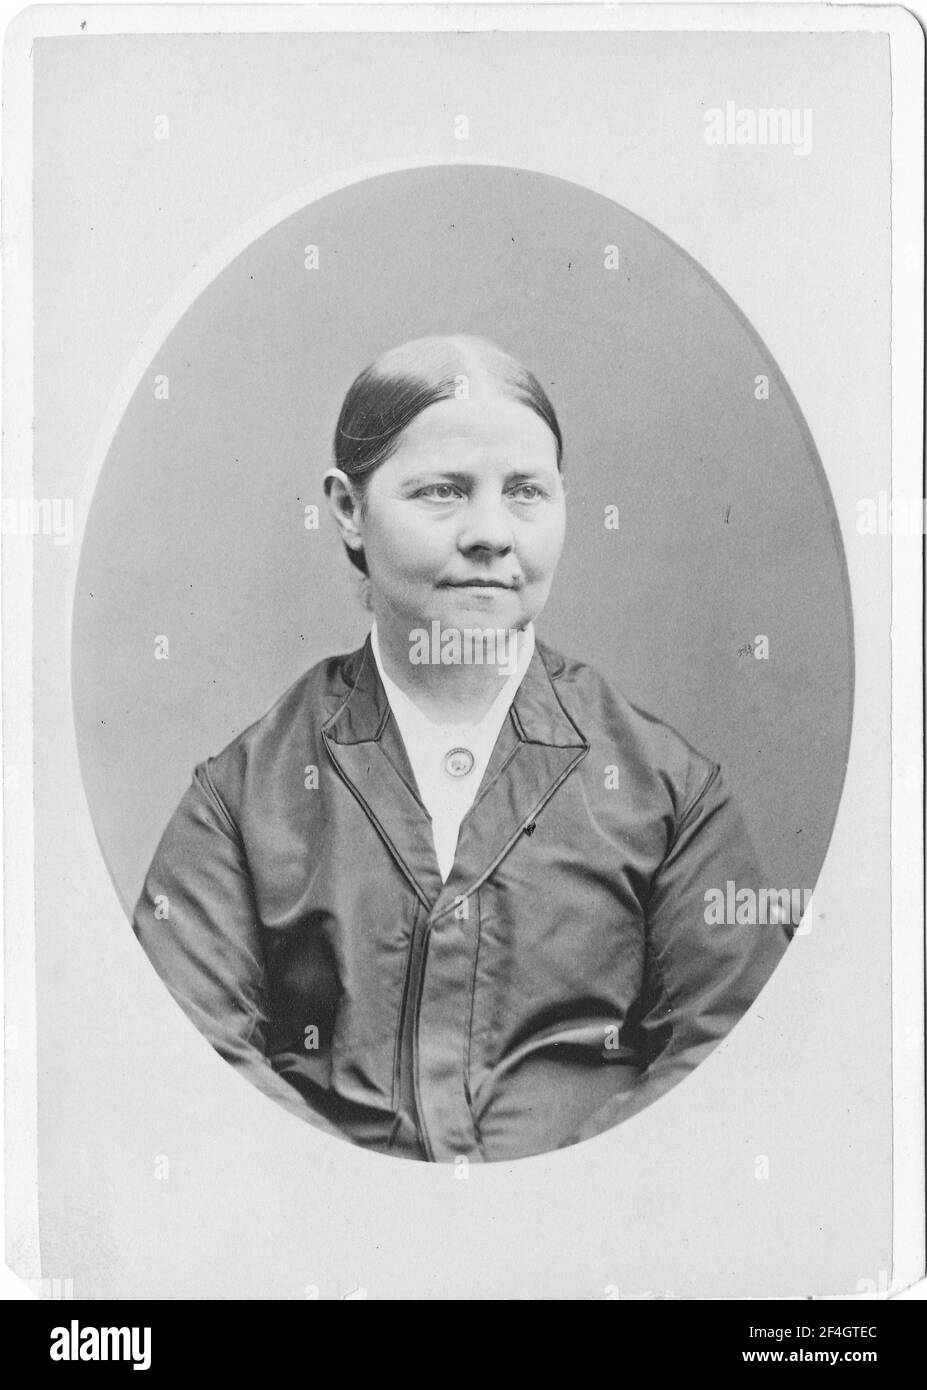 Cabinet photo with a portrait, from the waist up, of suffragist and abolitionist Lucy Stone, with a relaxed expression on her face, photographed by Sumner B Heald, Boston, Massachusetts, 1875. Photography by Emilia van Beugen. () Stock Photo